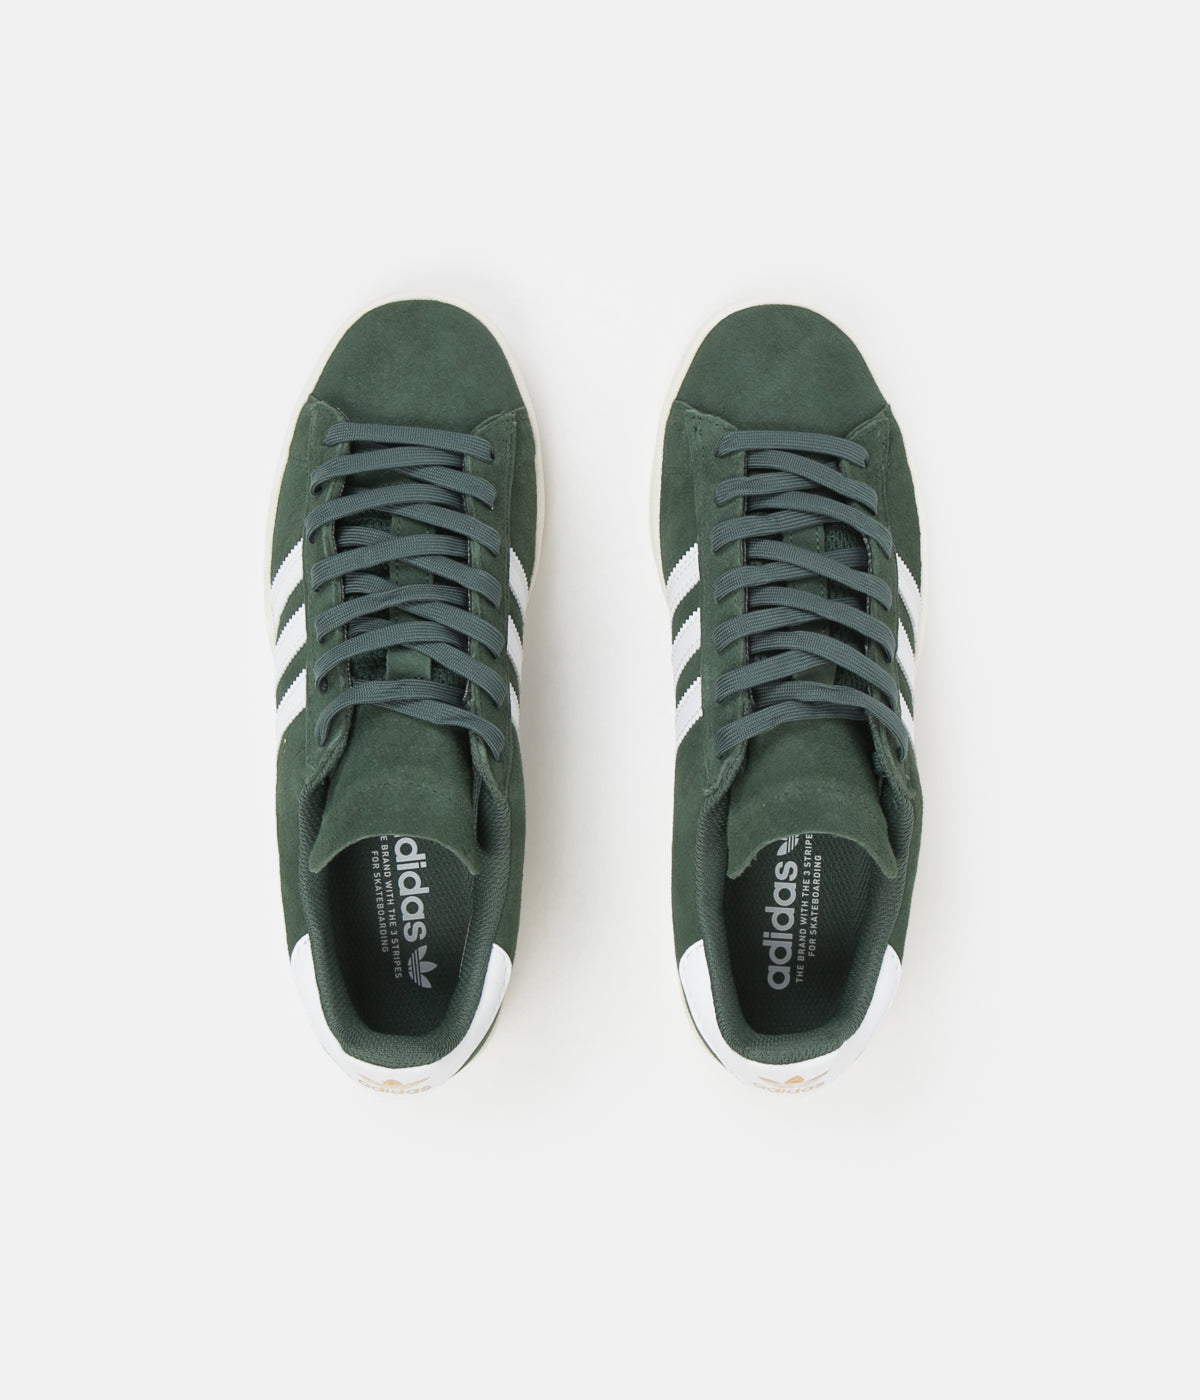 adidas shoes in green